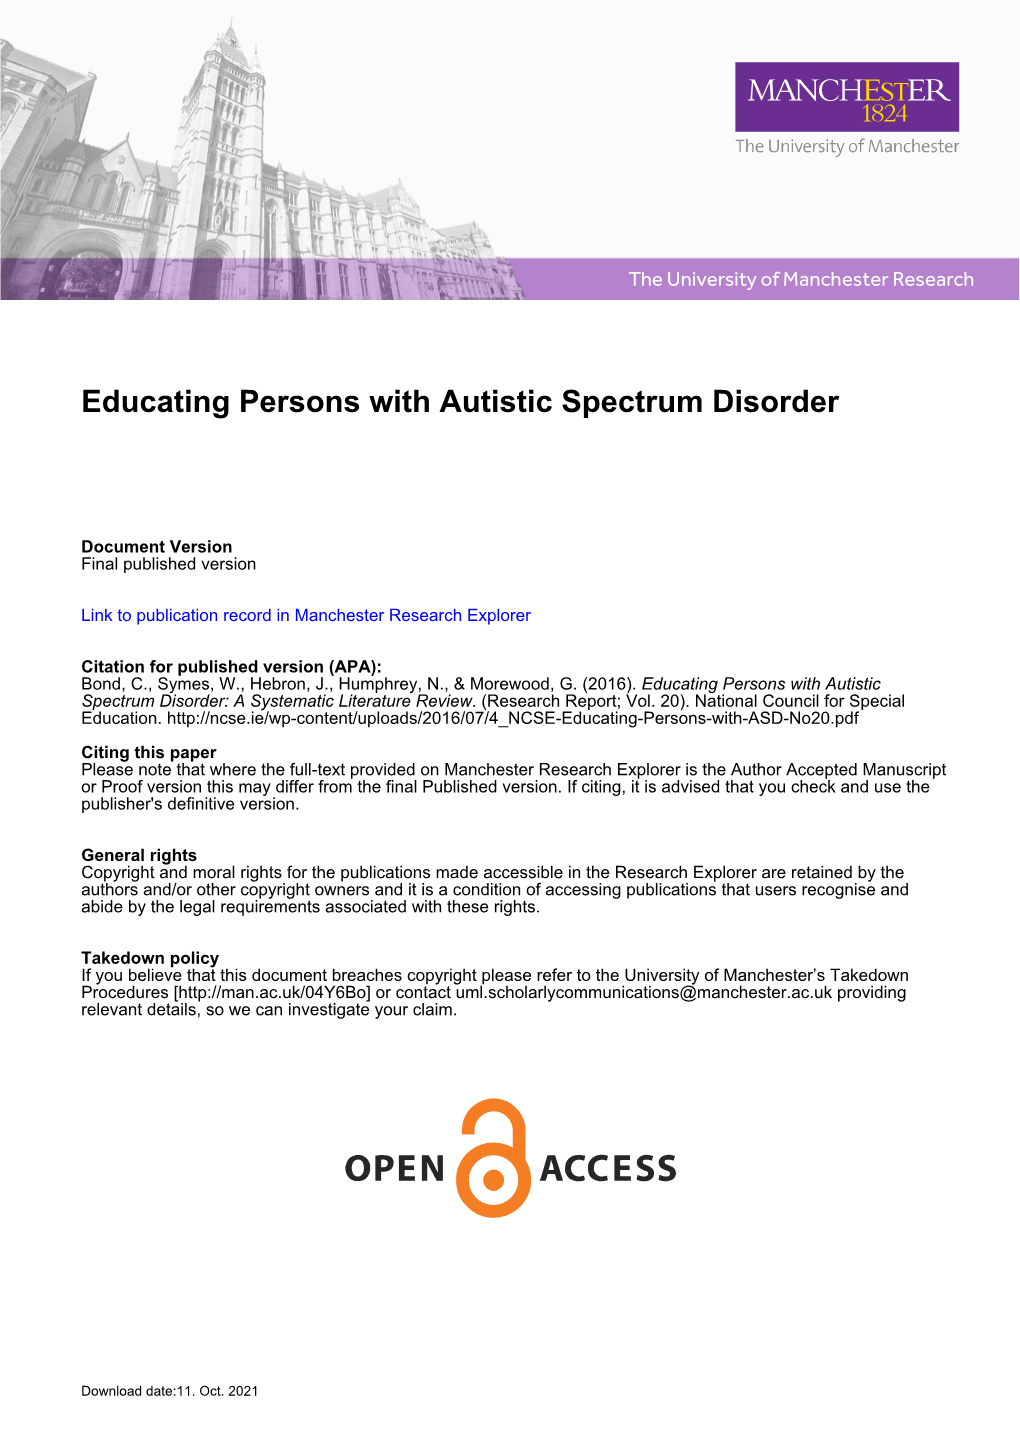 Educating Persons with Autistic Spectrum Disorder